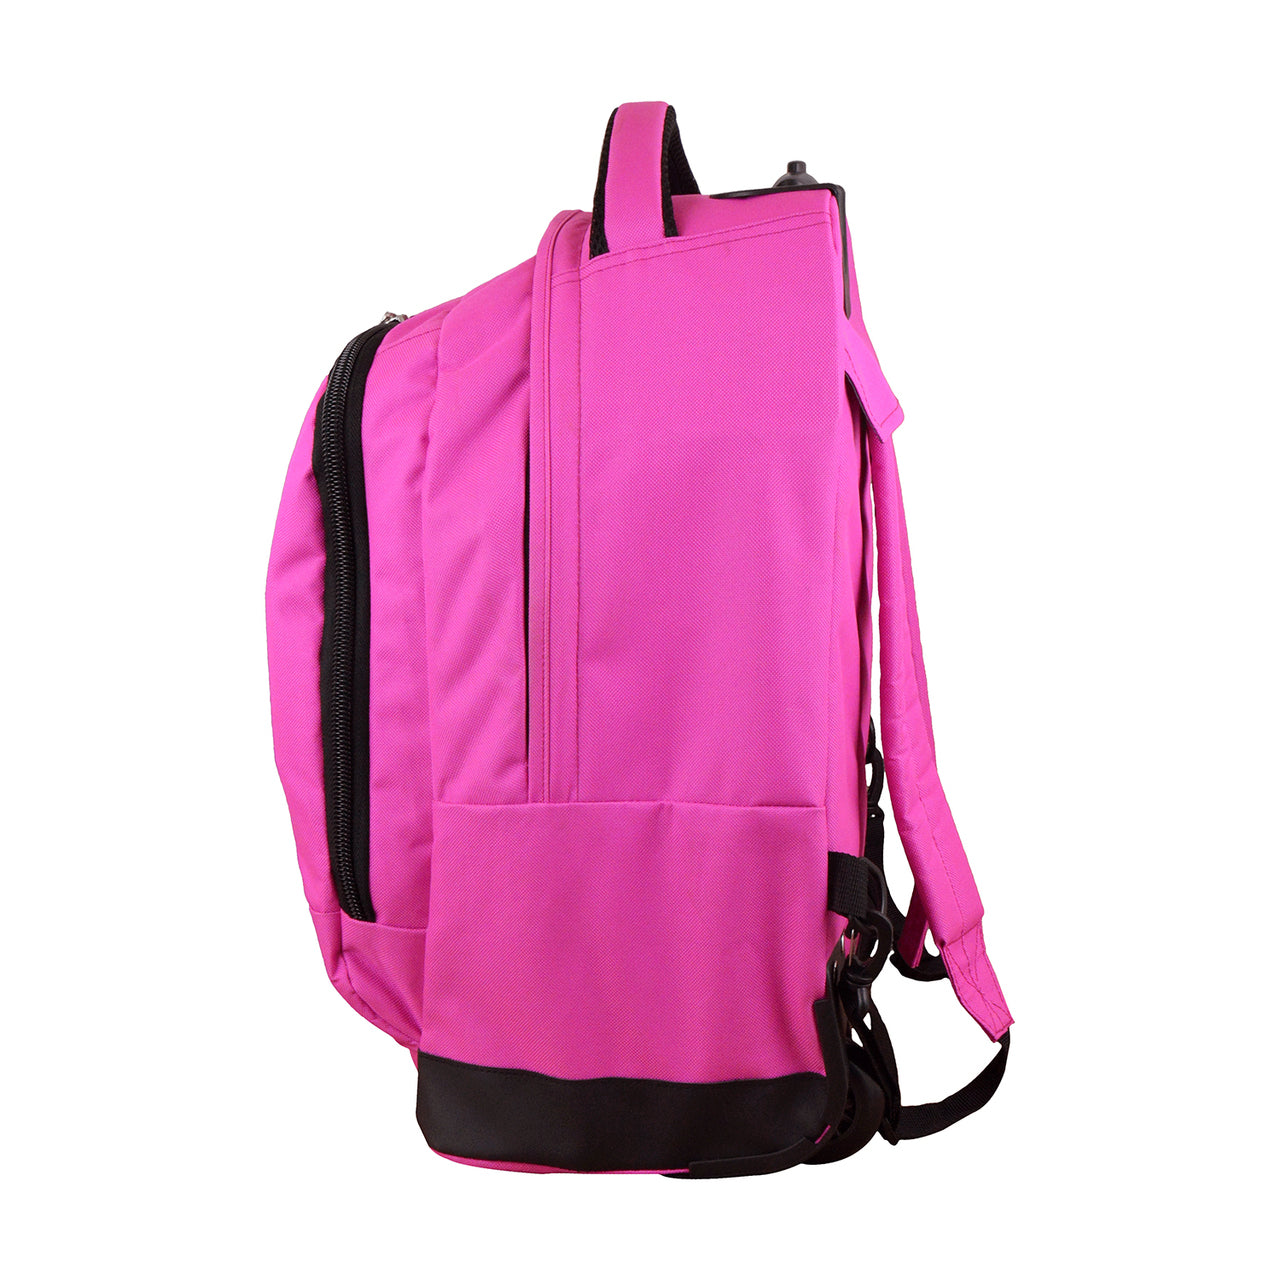 New Jersey Devils Premium Wheeled Backpack in Pink